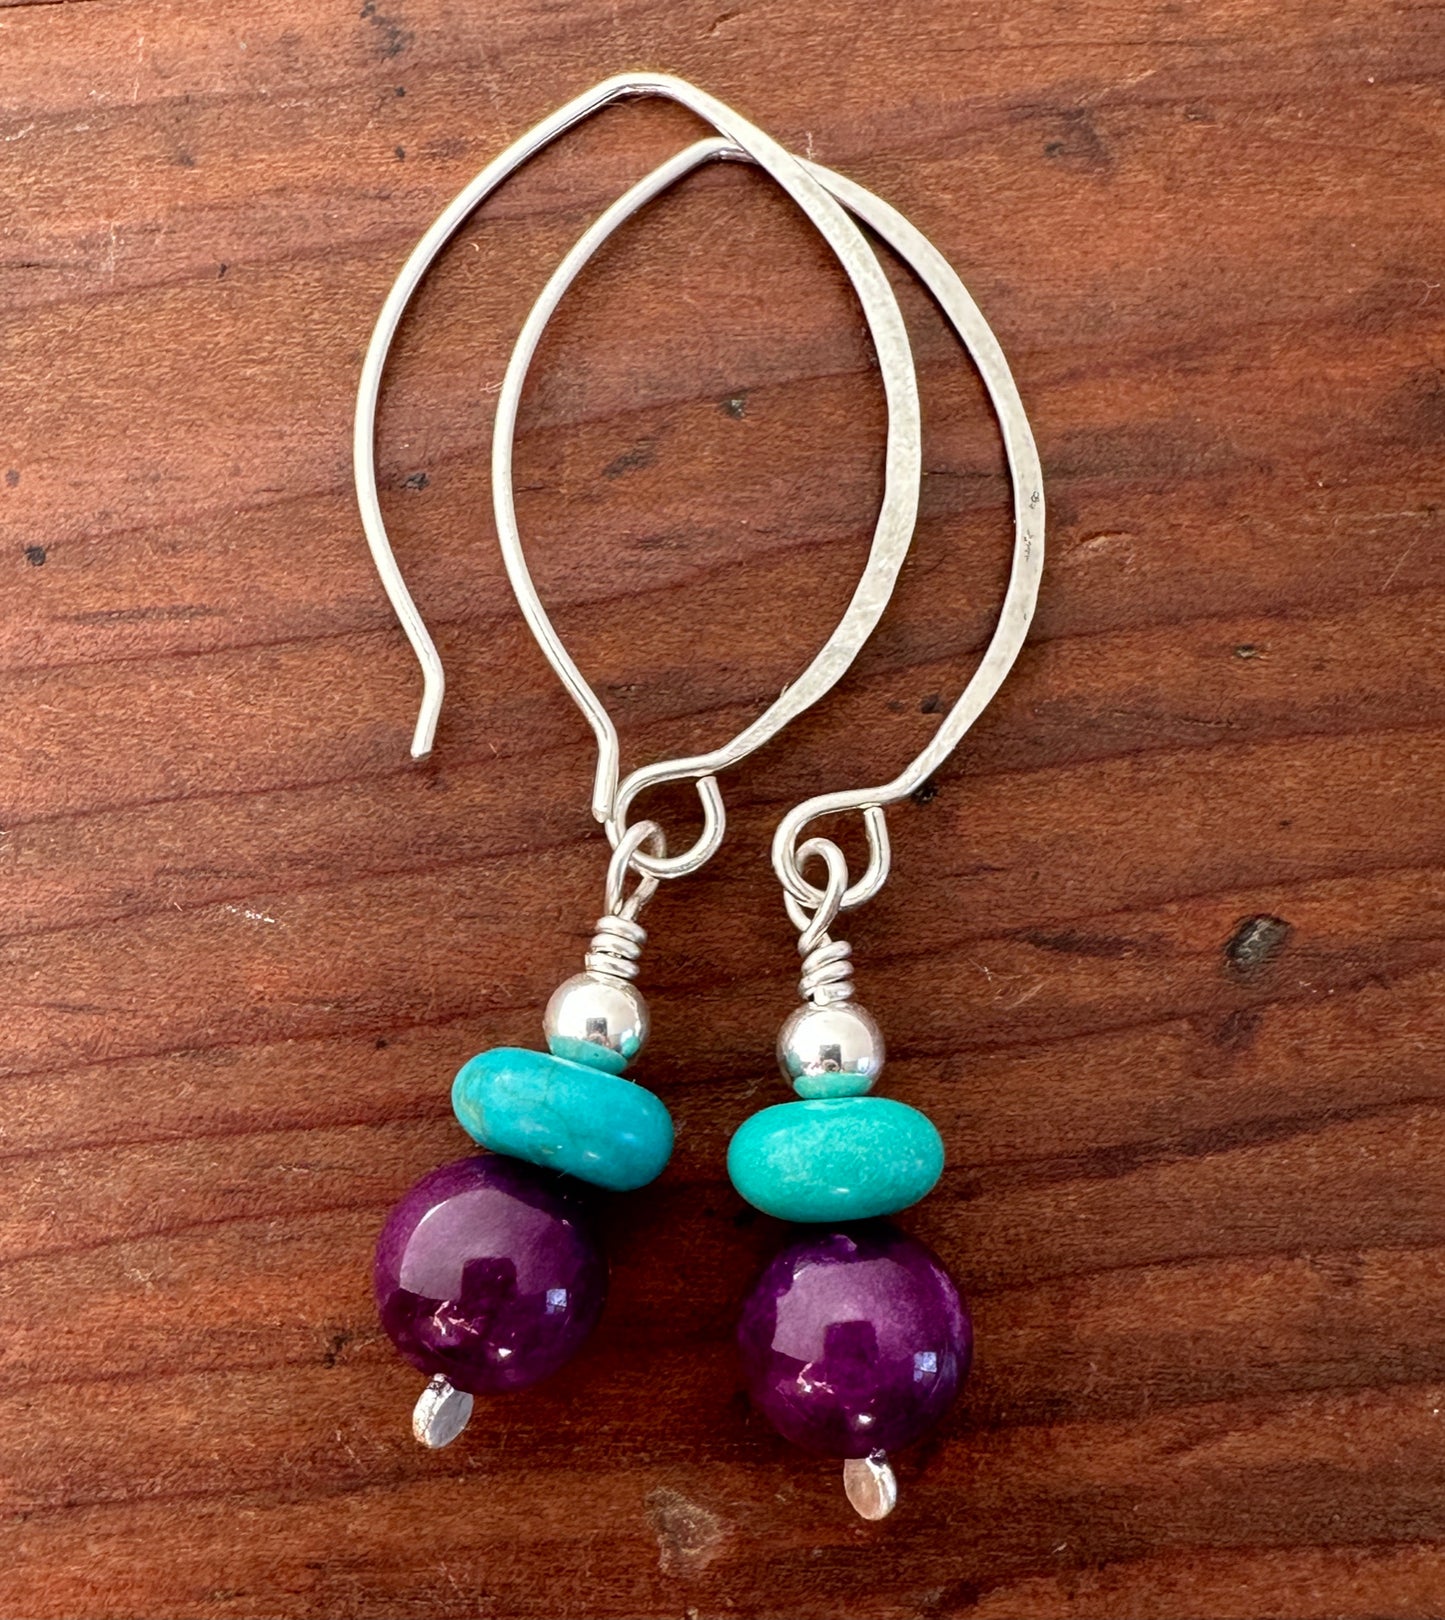 Sugilite with Turquoise Earrings on Almond Shaped Sterling Silver  Ear Wires